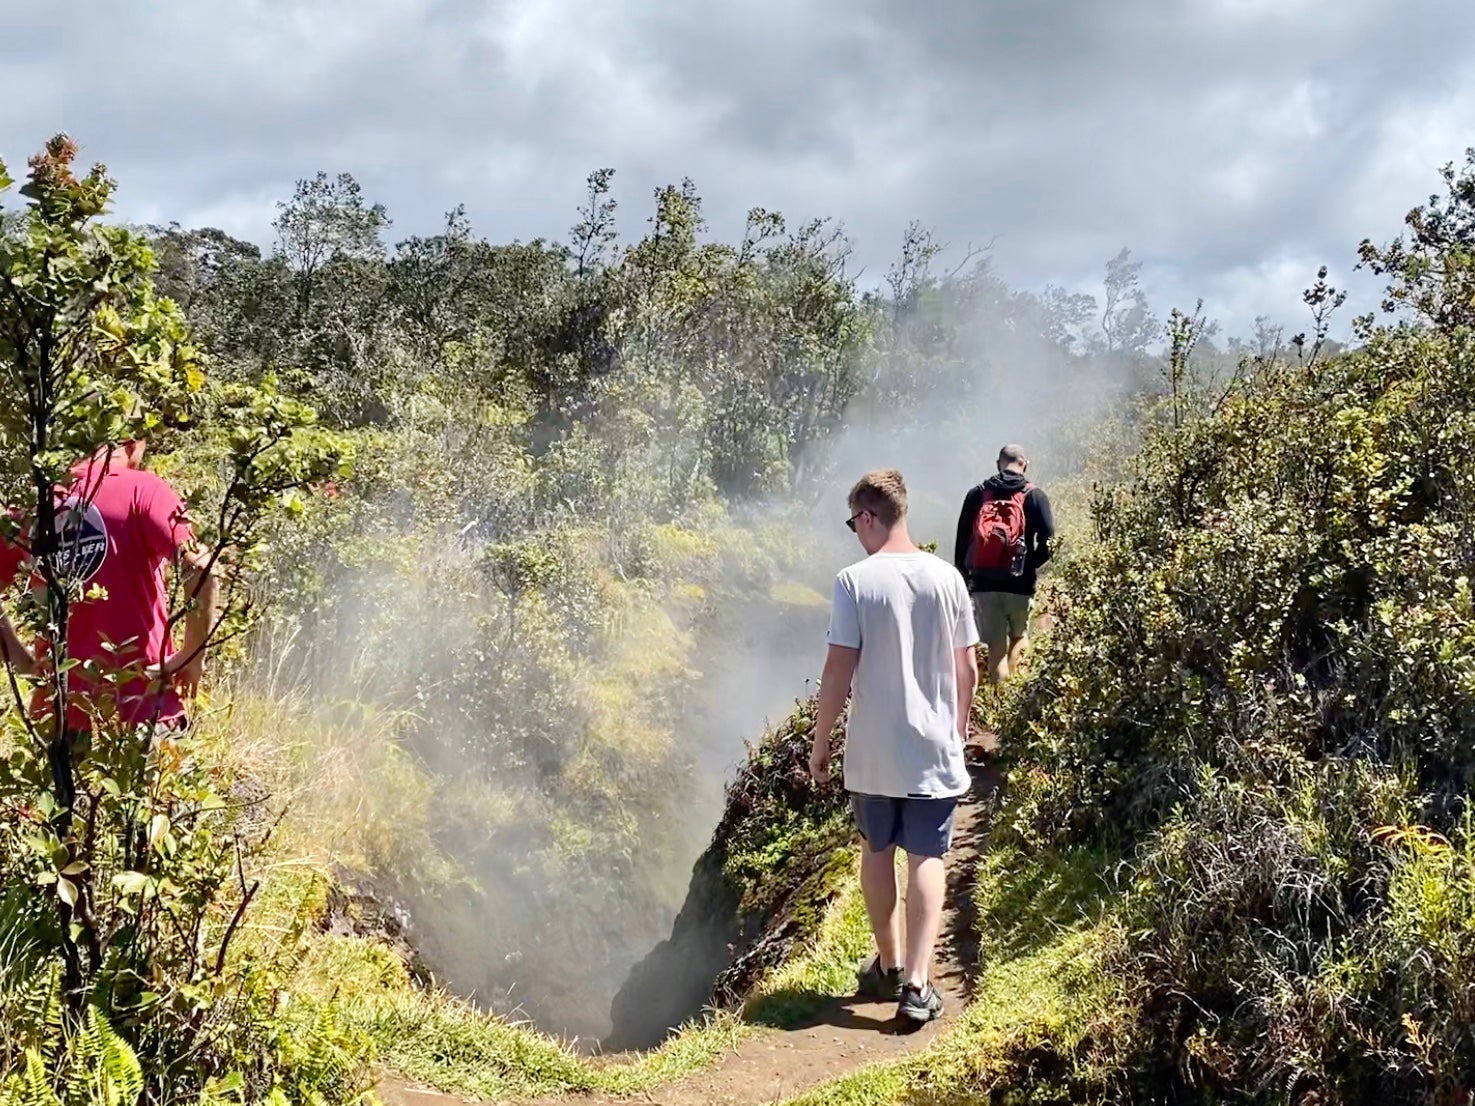  Hiking near the Kilauea Crater on the Big Island is exhilirating. (foto por 2DadsWithBaggage)